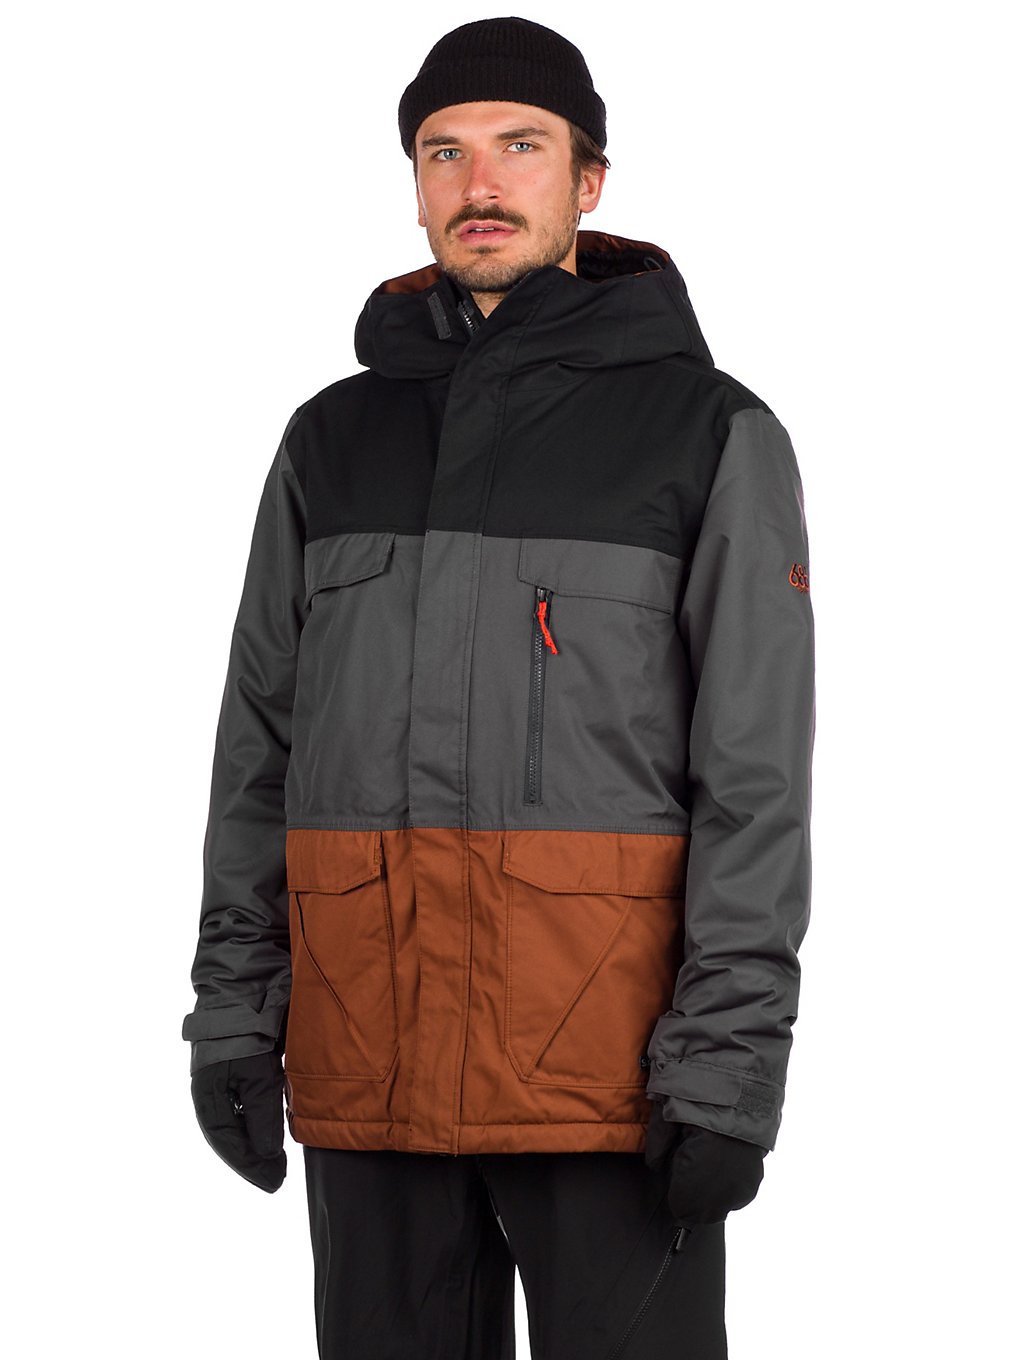 686 Infinity Insulated Jacket charcoal colorblock